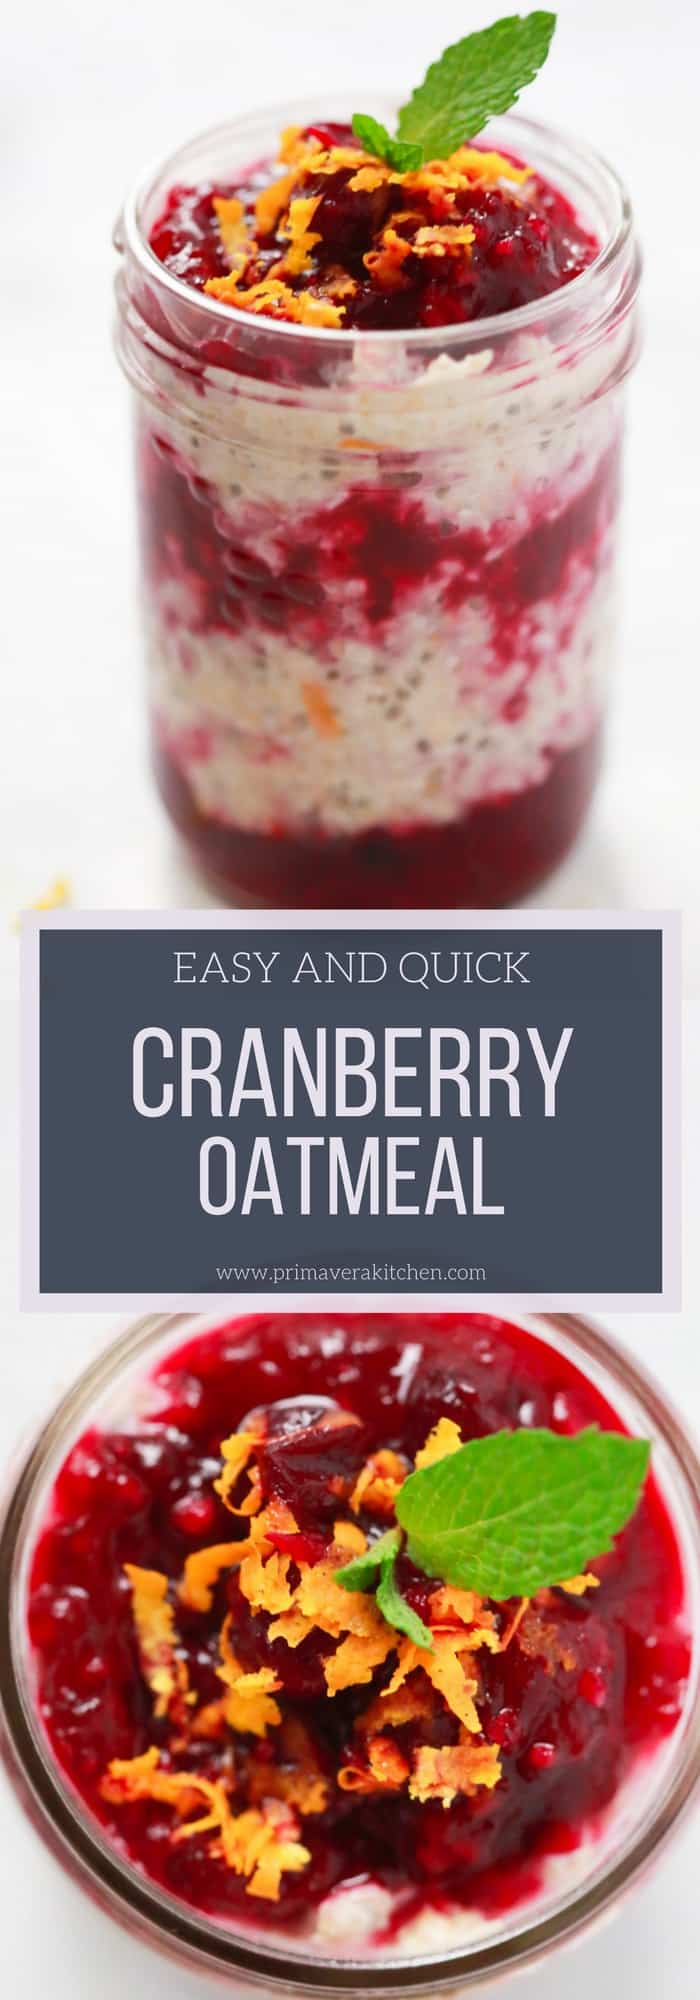  Nothing like delicious oatmeal for breakfast! This Easy Cranberry Oatmeal Recipe is so easy to prepare and it’s very delicious. 